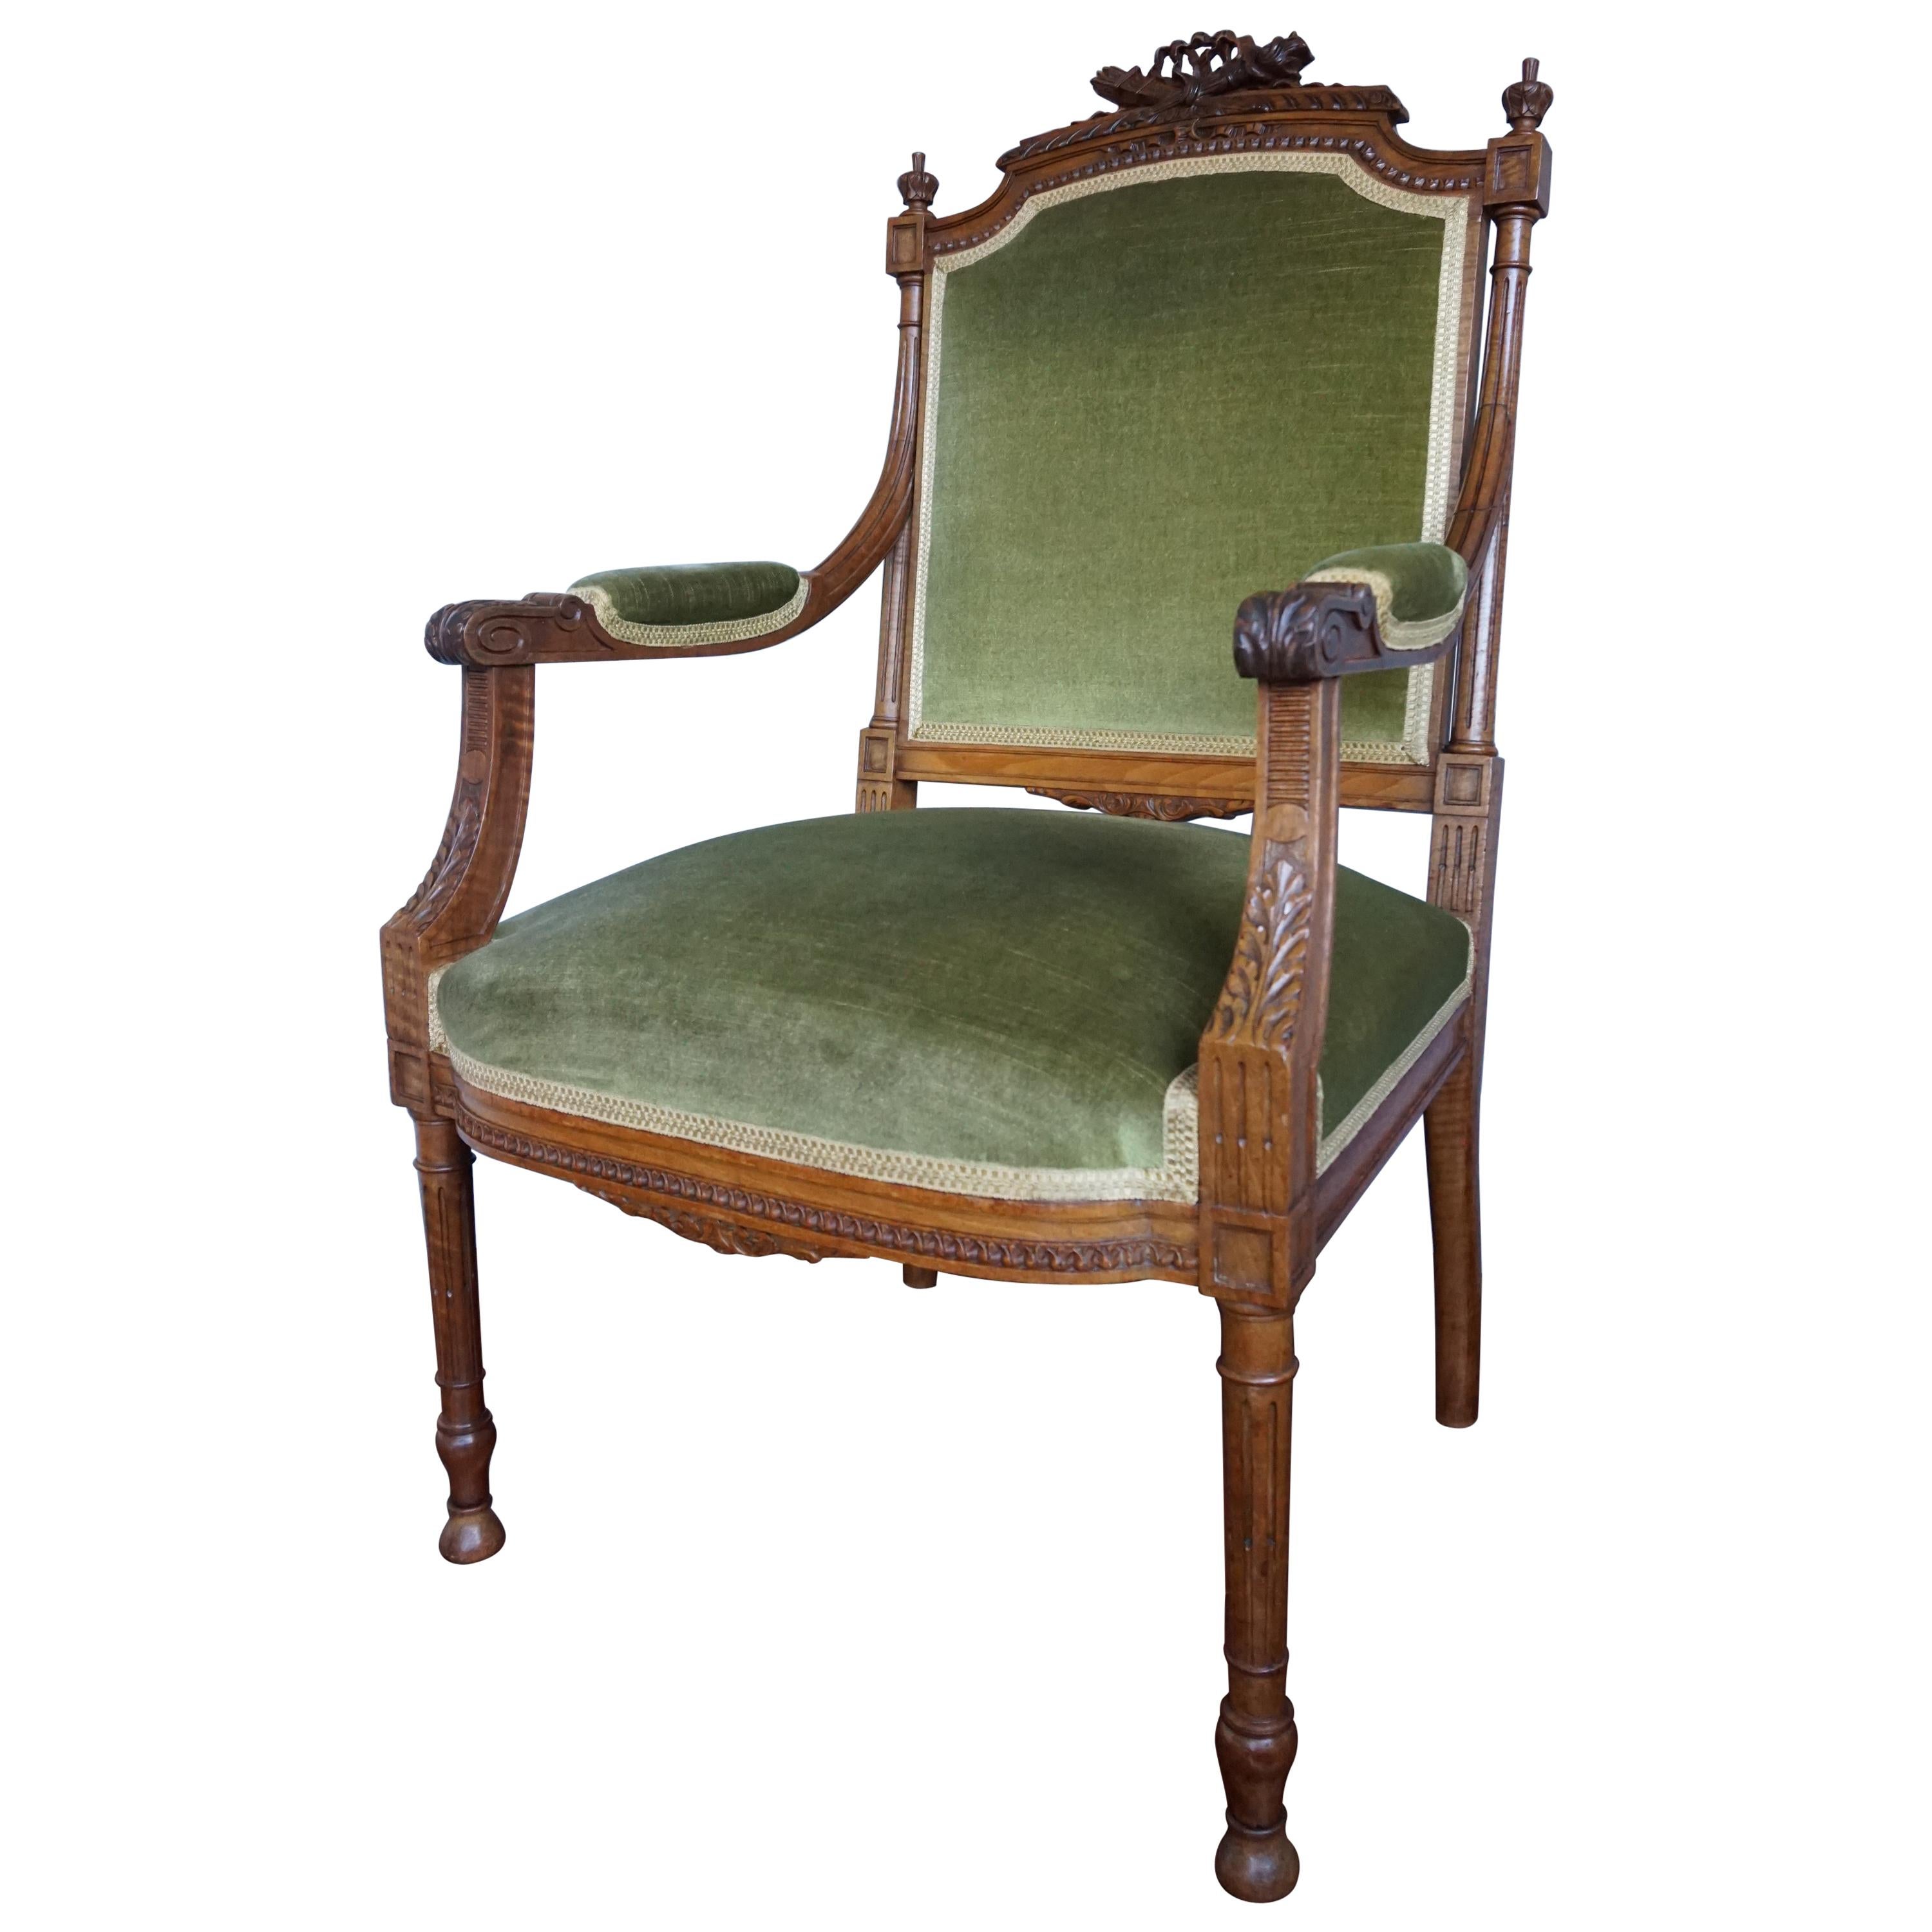 Beautiful Antique Hand Carved Nutwood Chair / Armchair With Green Upholstery